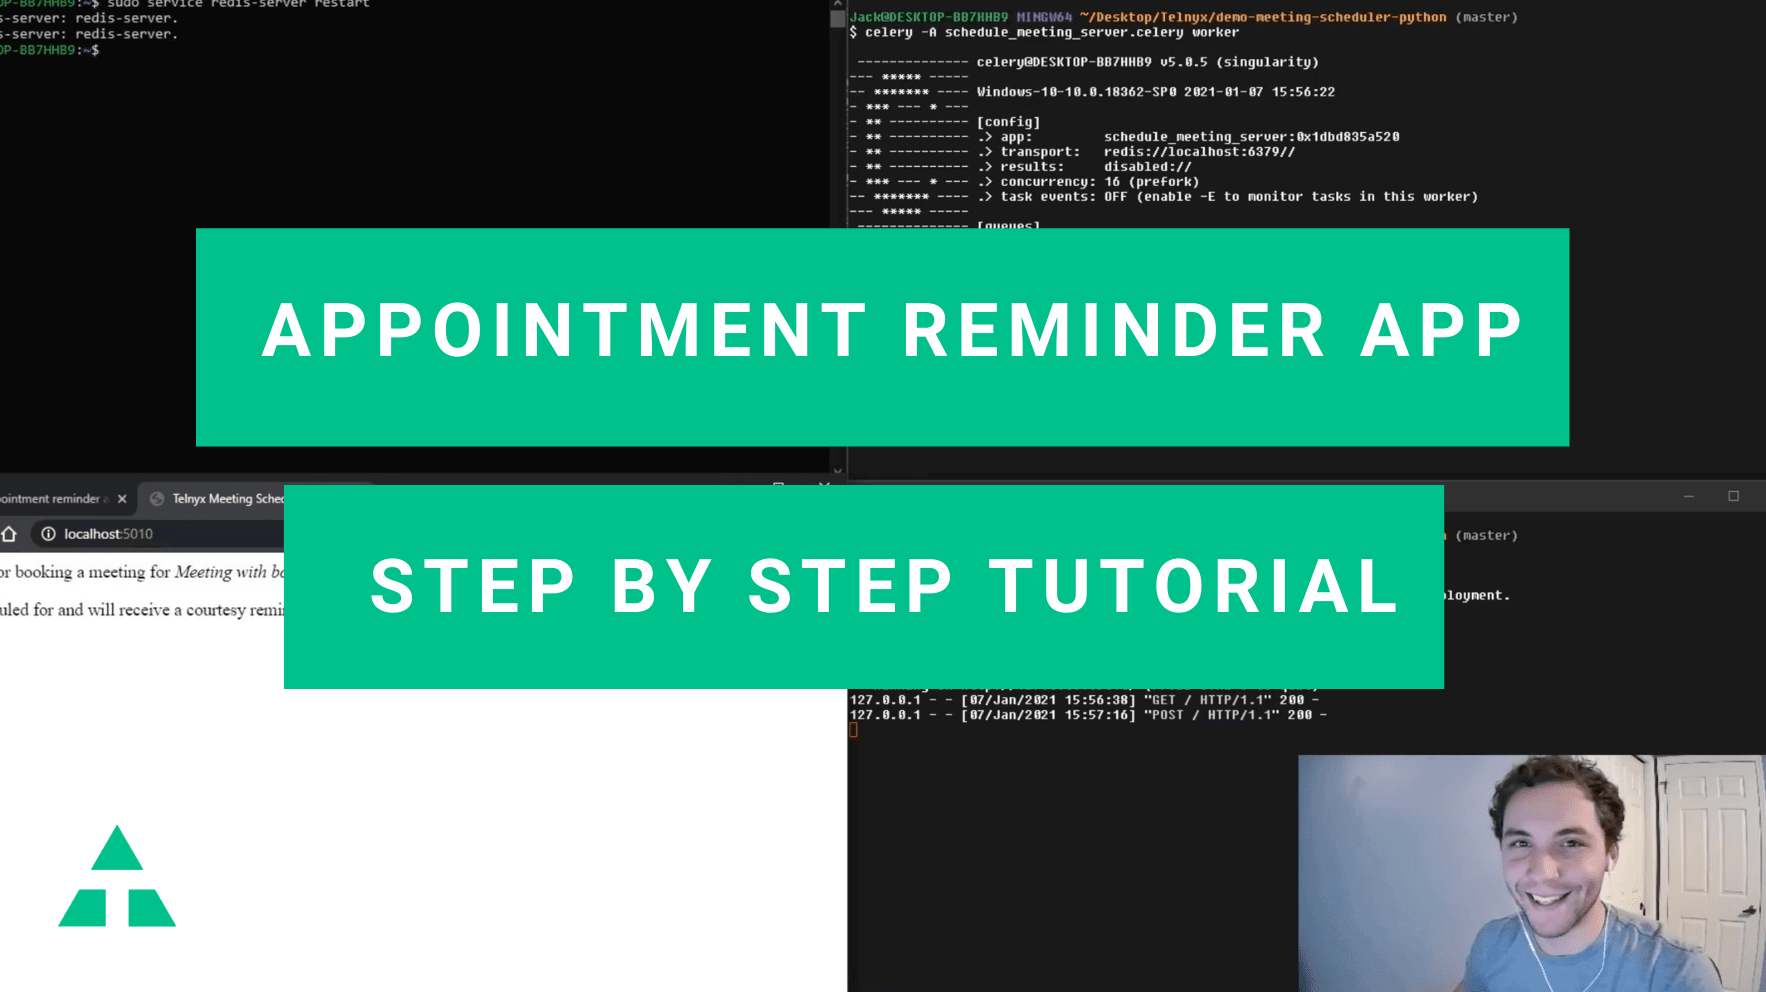 Appointment reminder application step by step tutorial